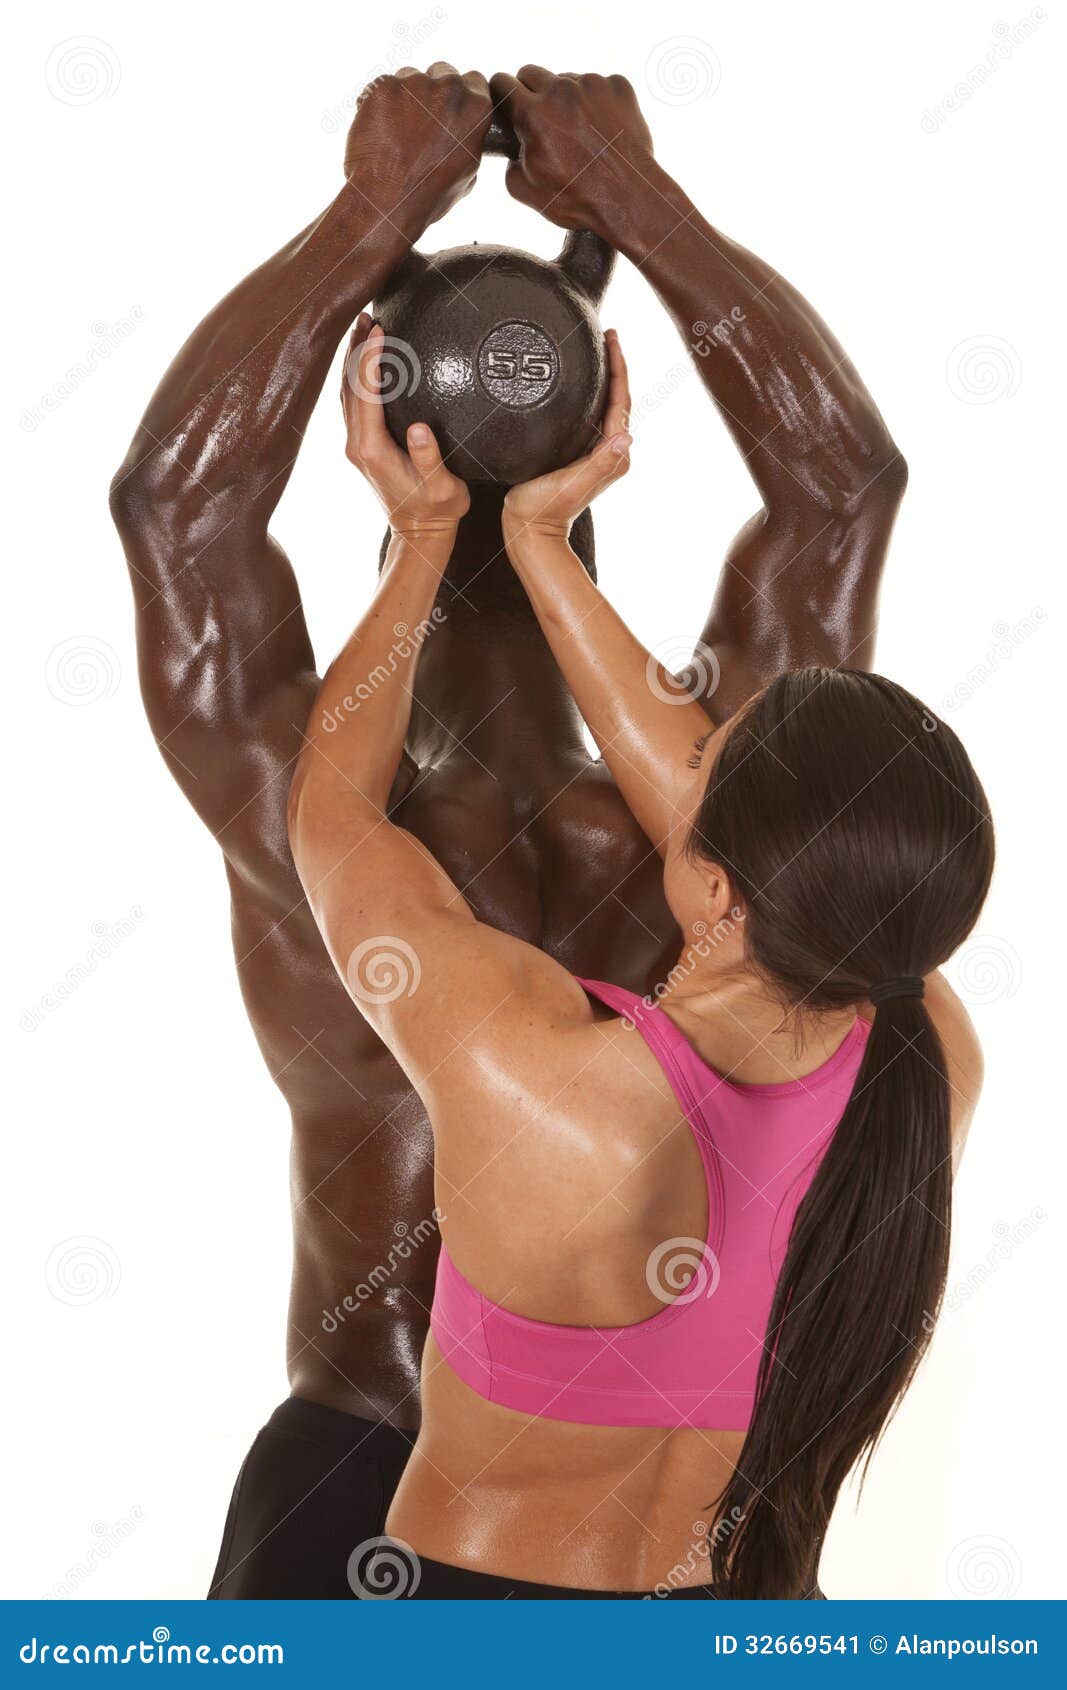 Royalty-Free photo: Photograph of woman in black sport brassiere holding  kettlebell